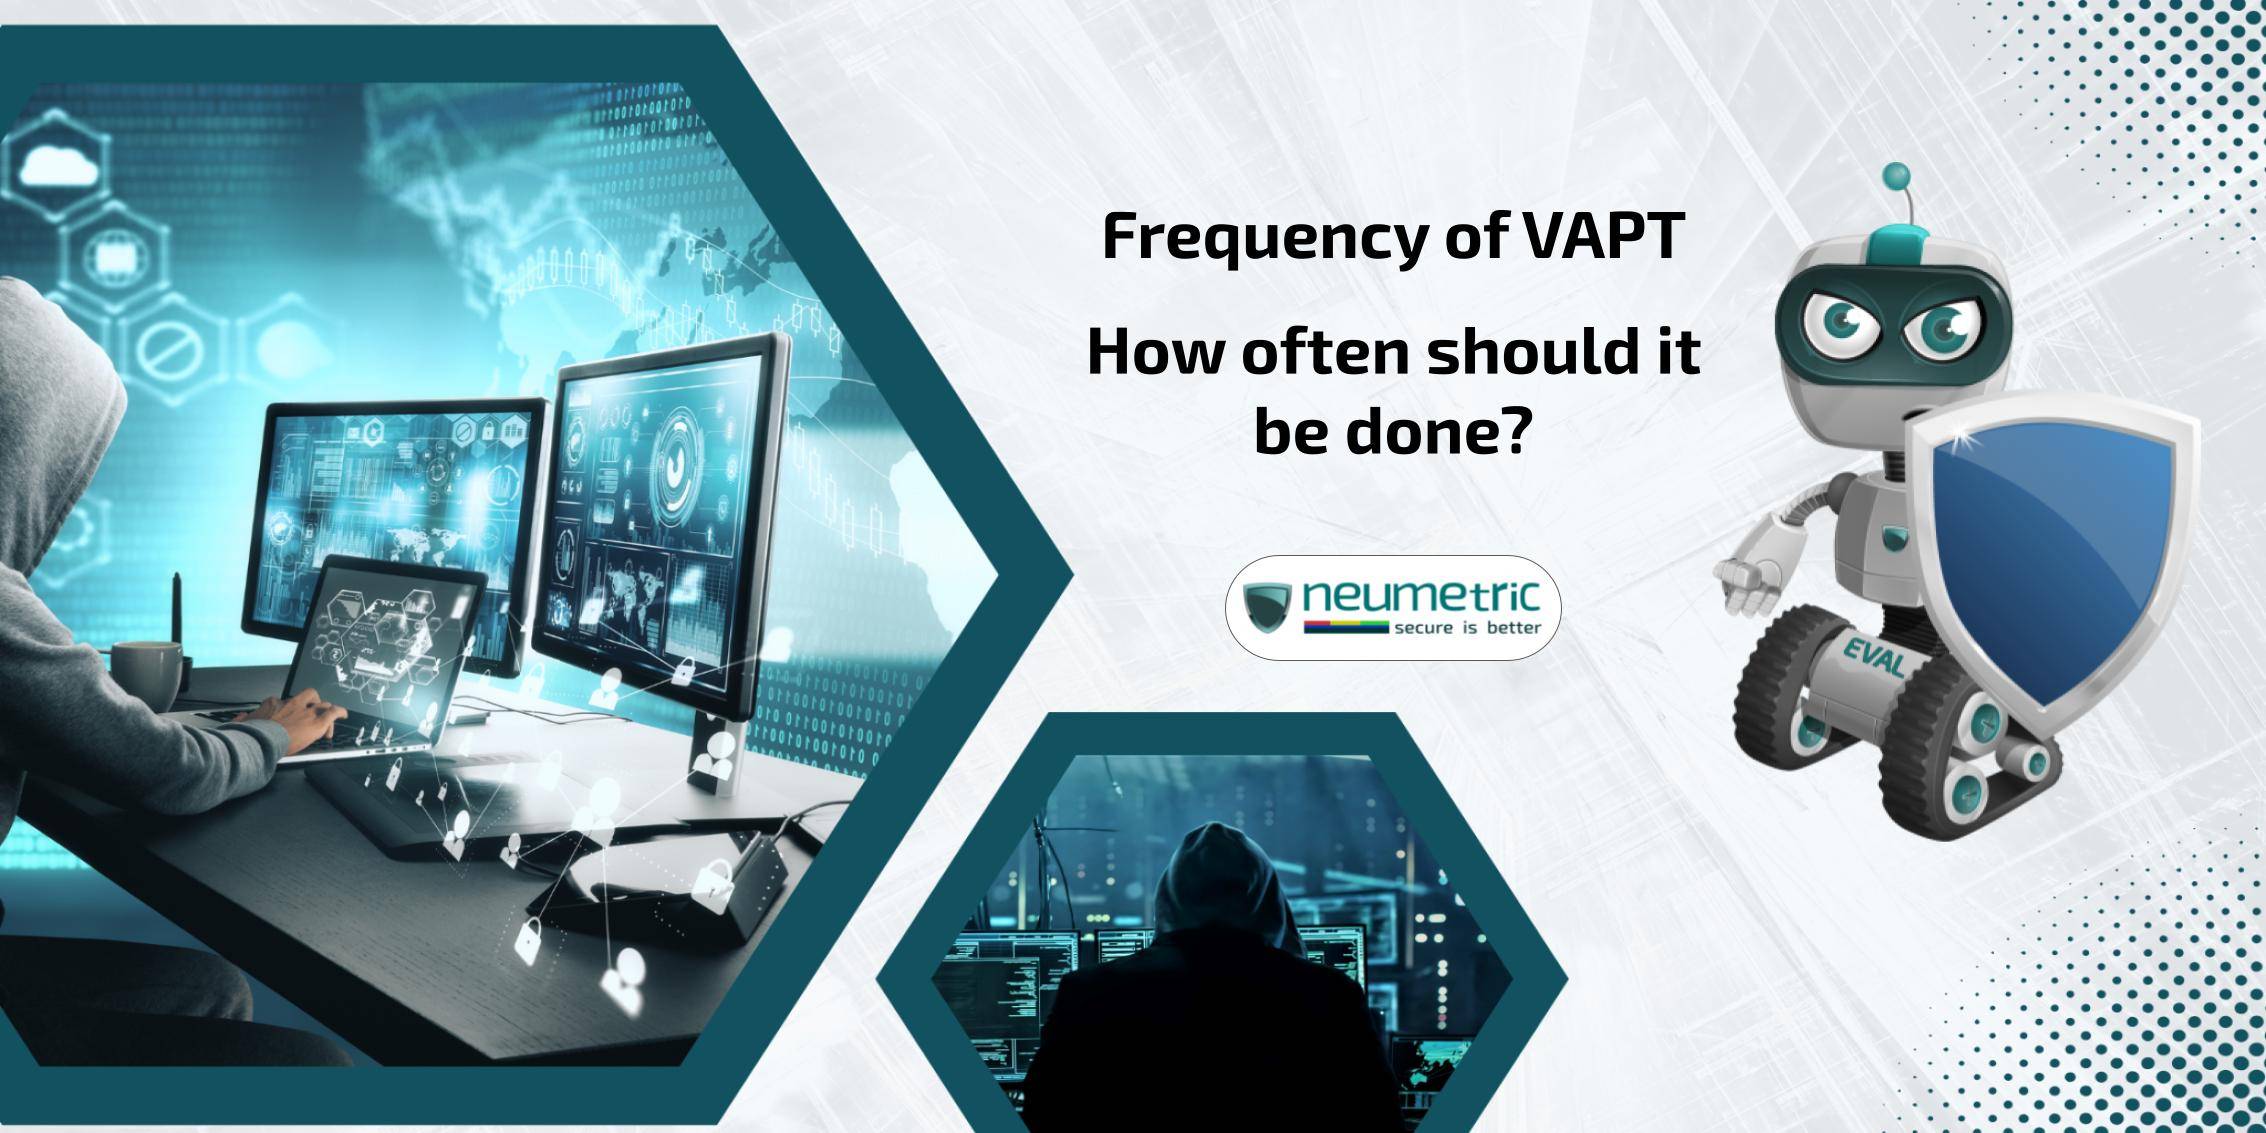 Frequency of VAPT